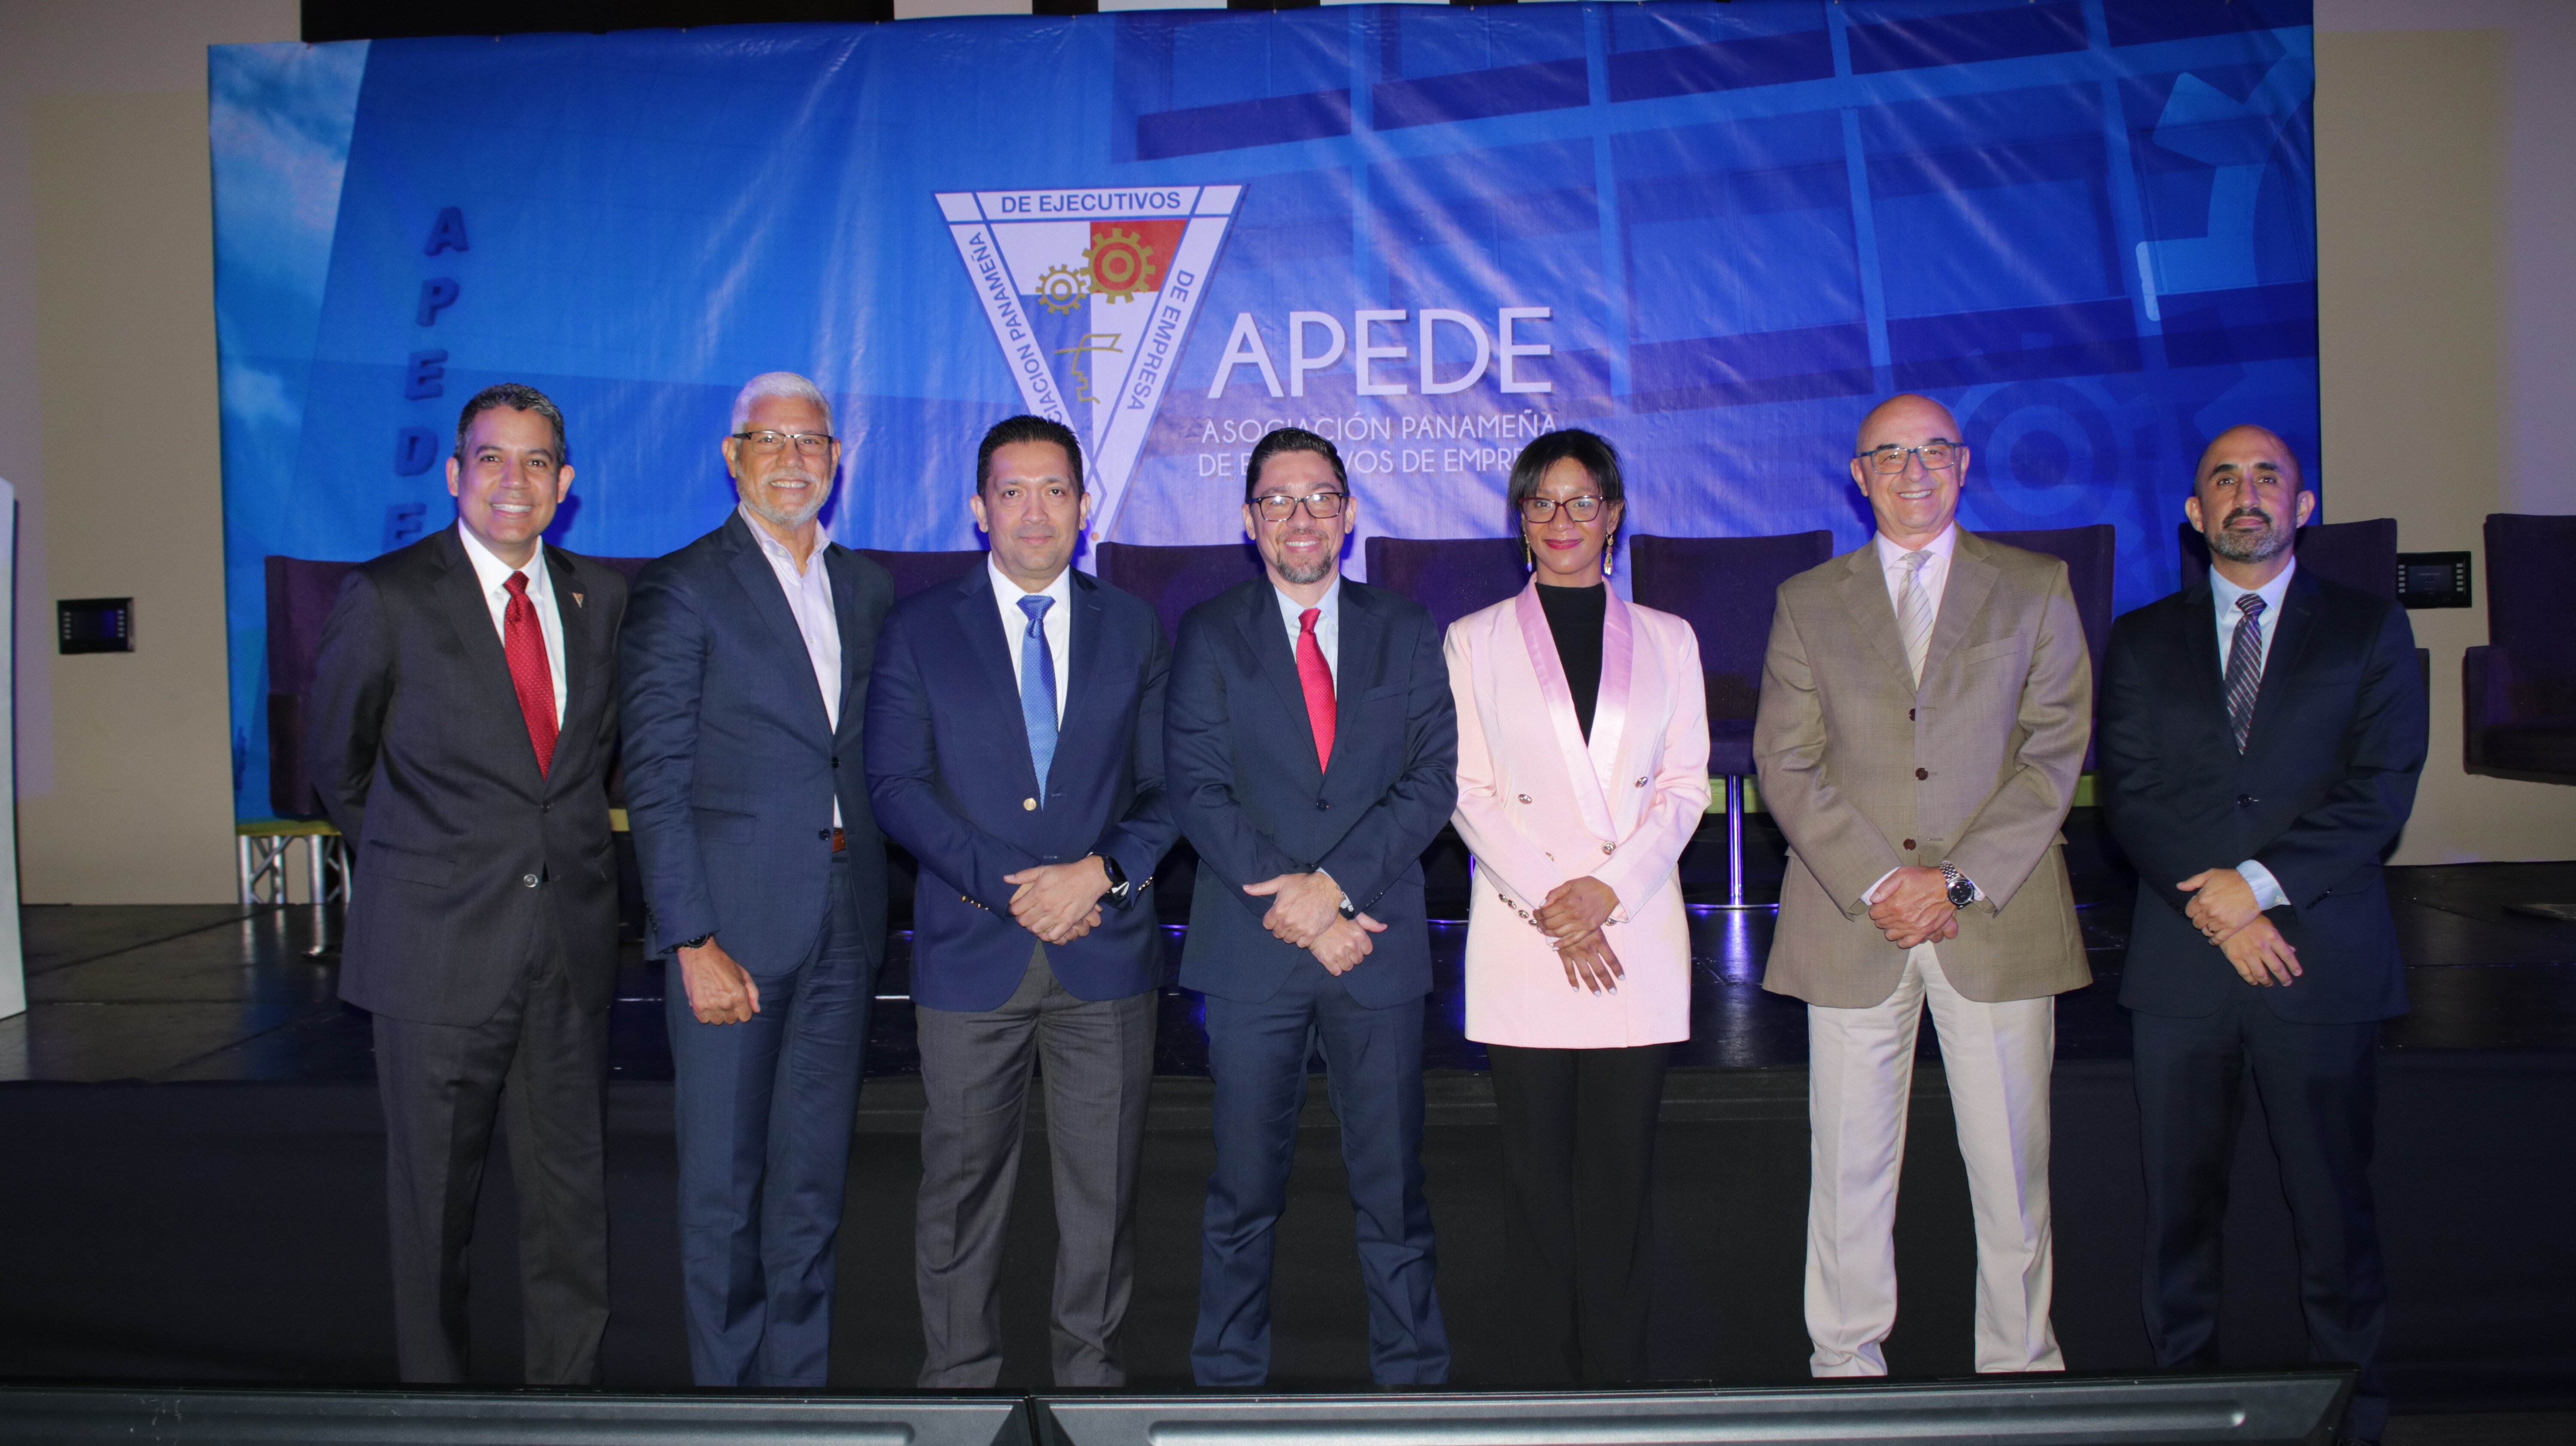 Arpel presents regional vision of just energy transitions at Panamanian Association of Business Executives event